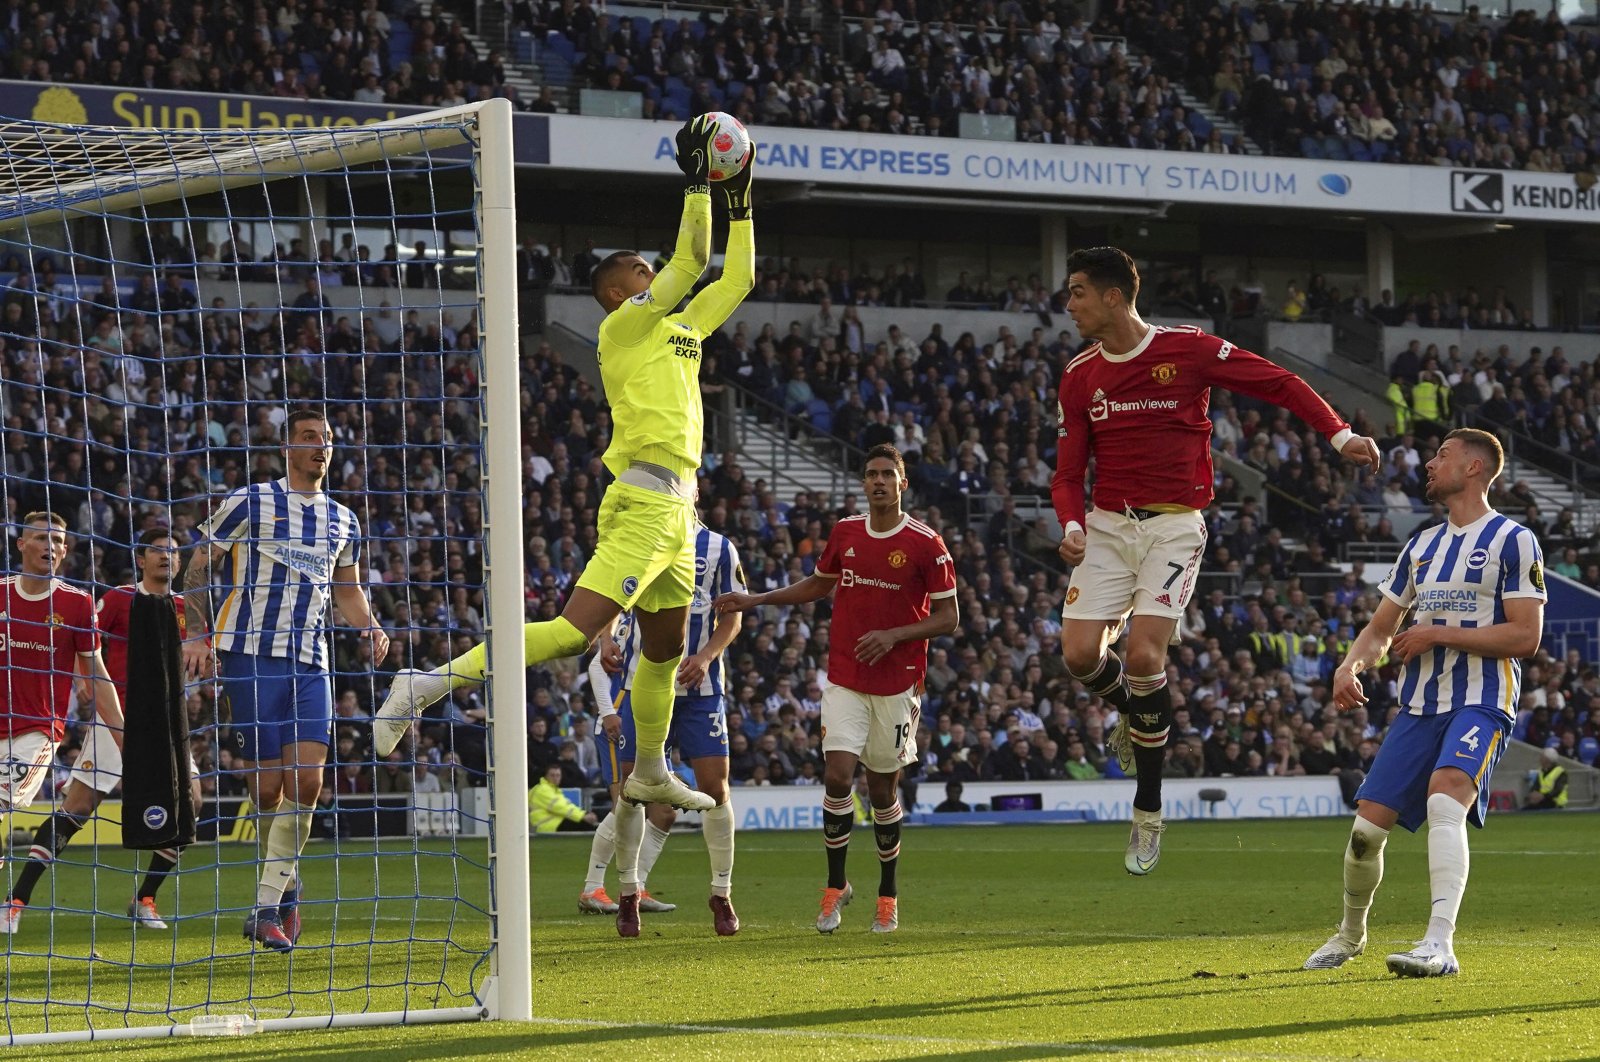 Brighton and Hove Albion GK Robert Sanchez collects the ball in front of Ronaldo, Brighton, England, May 7, 2022. (AP PHOTO) 